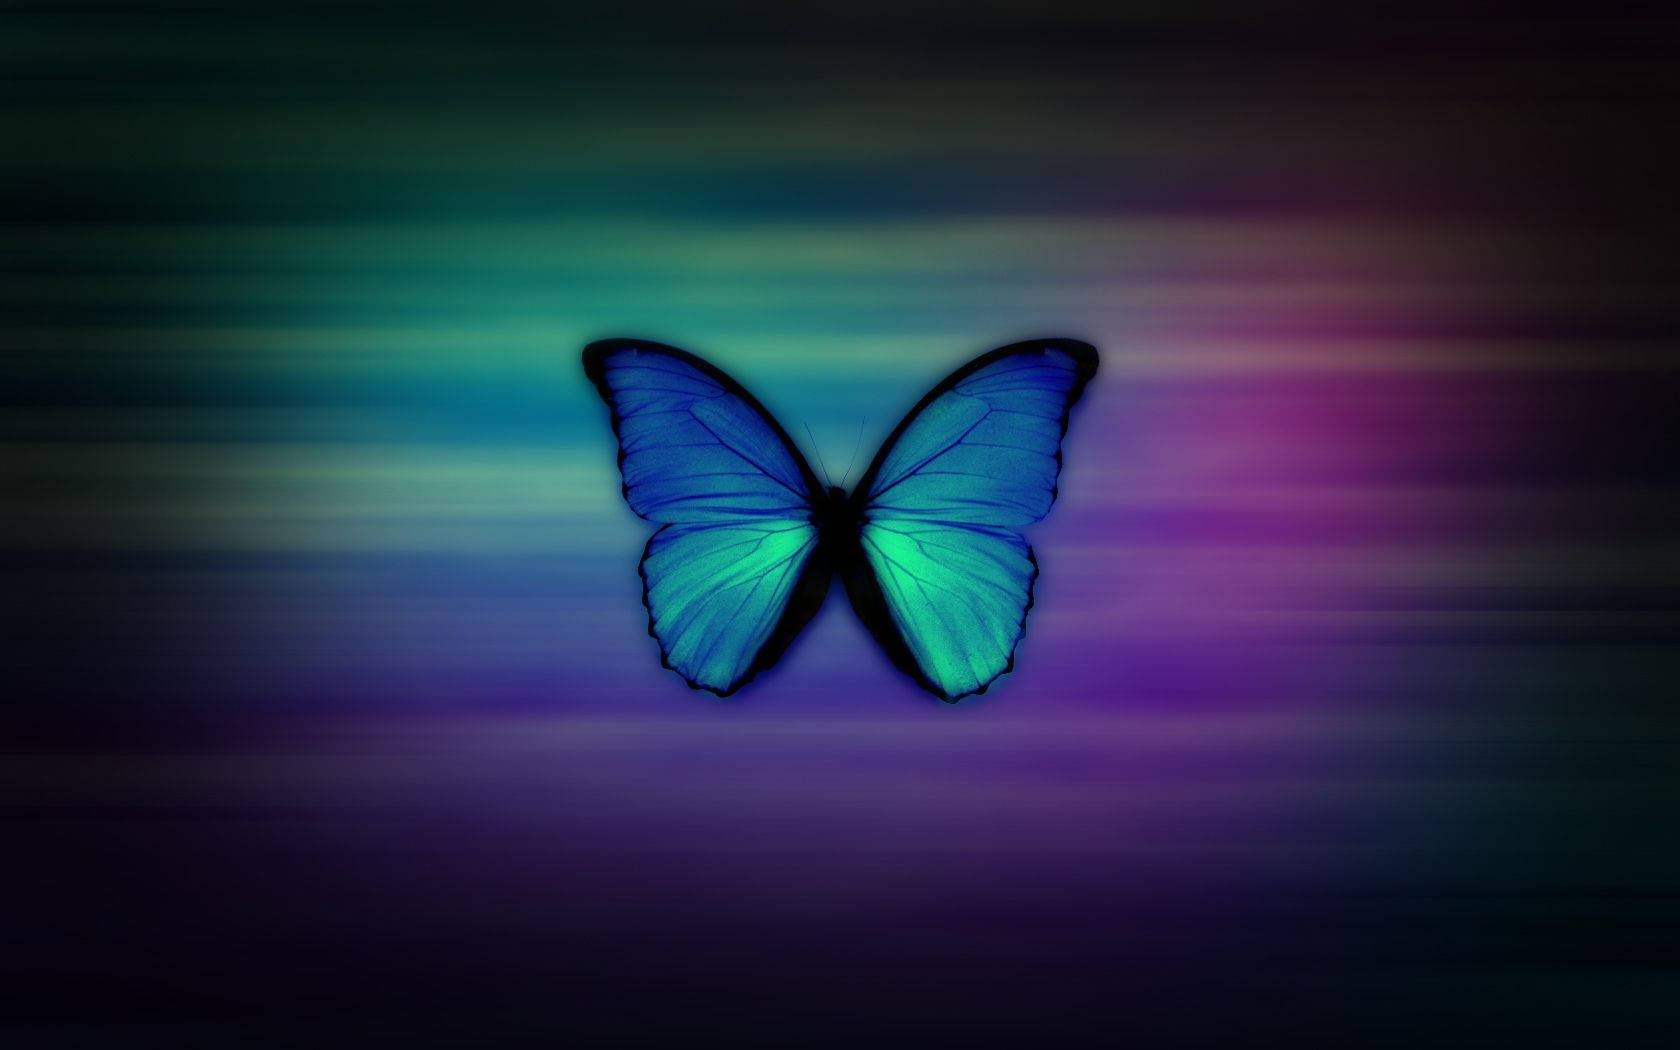 Illuminate Your Style With This Neon Purple&Blue Butterfly Wallpaper